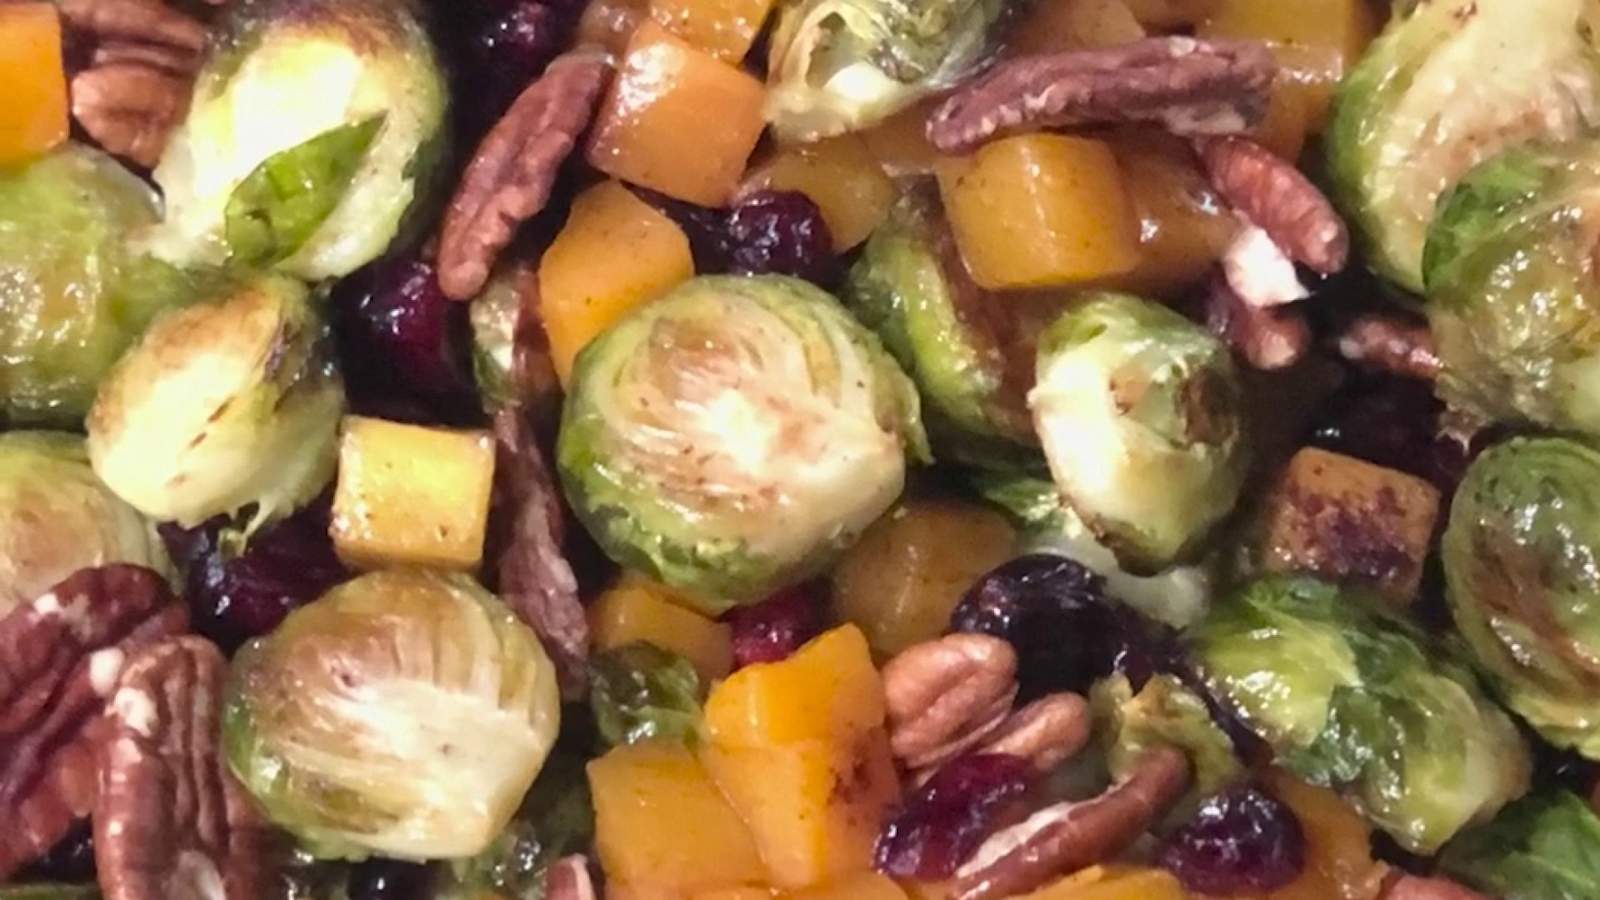 Holiday recipes: Roasted butternut squash and brussels sprouts with pecans and cranberries